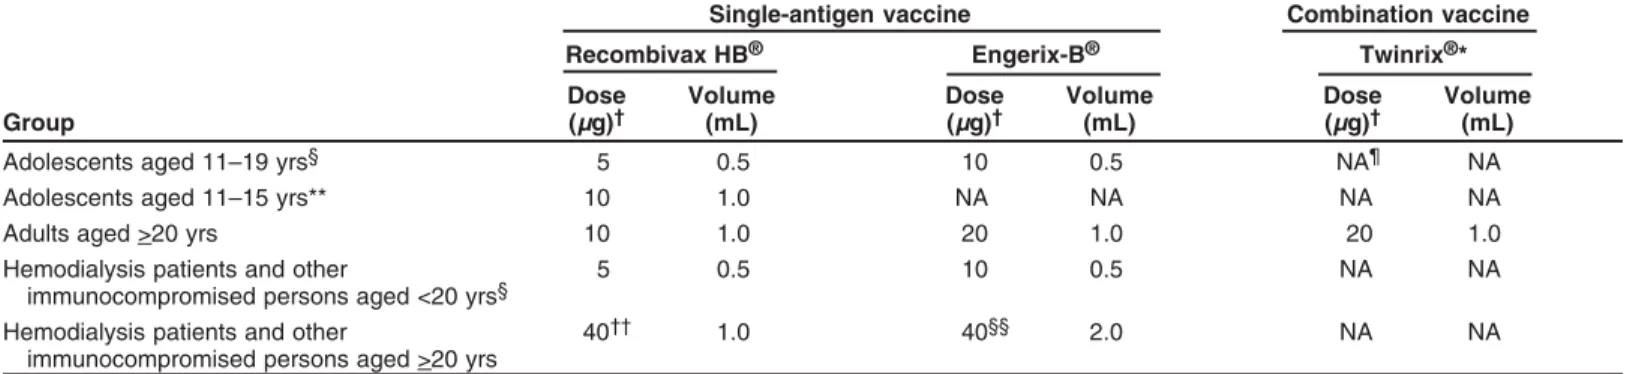 TABLE 3. Recommended doses of currently licensed formulations of adolescent and adult hepatitis B vaccines